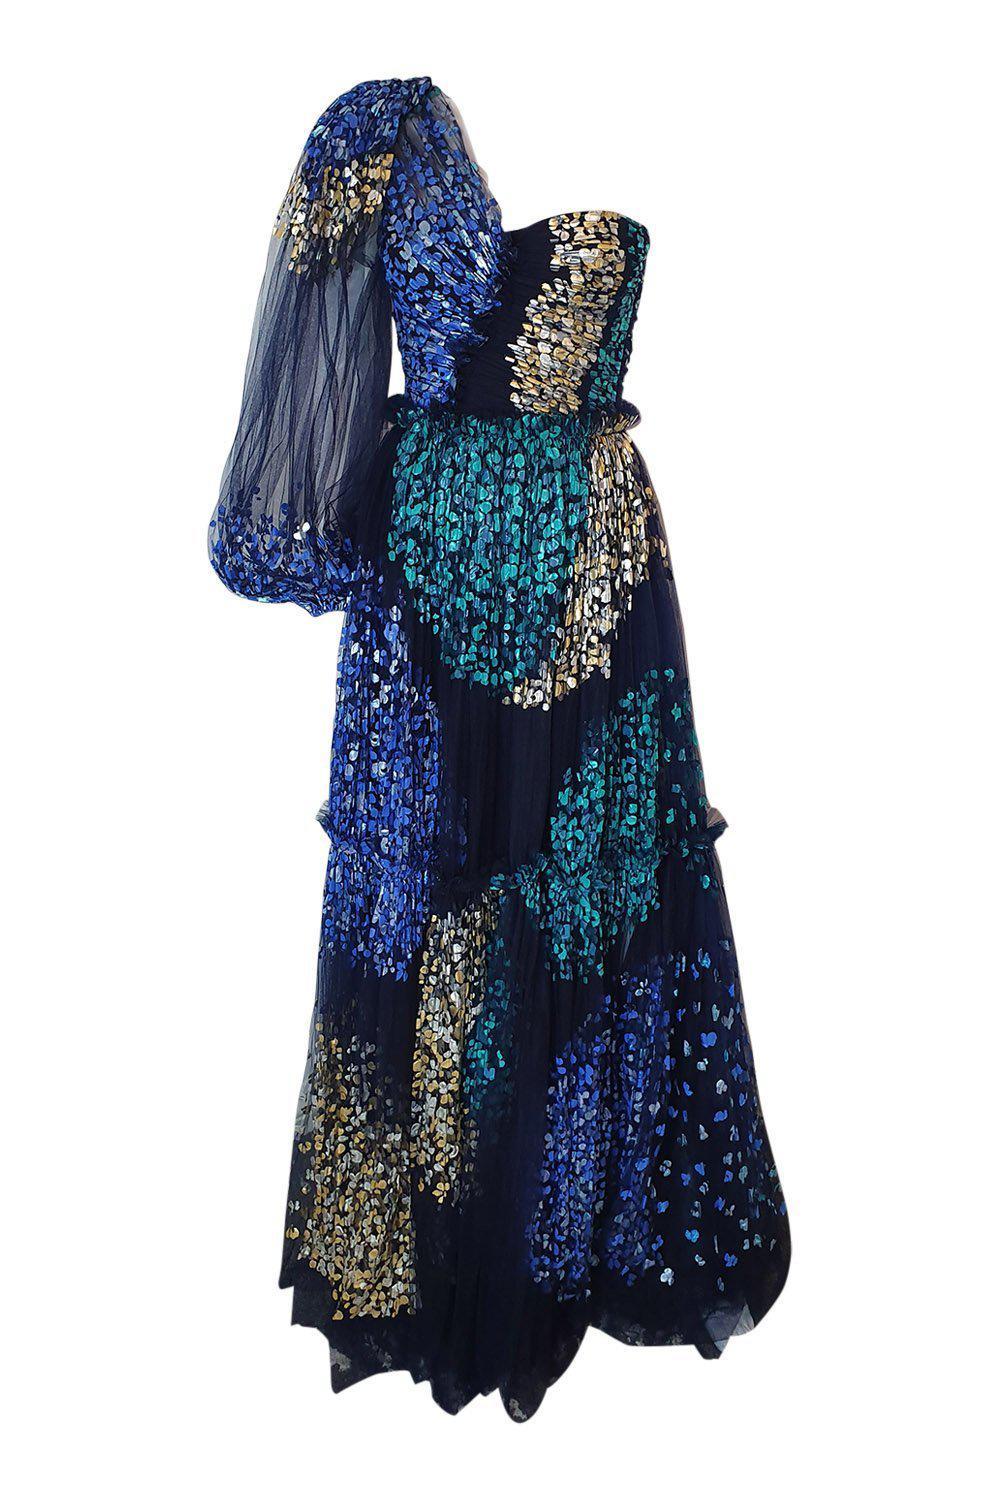 PETER PILOTTO Midnight Blue AW 2019 Hand Painted Tulle Ball Gown (UK 6)-Peter Pilotto-The Freperie